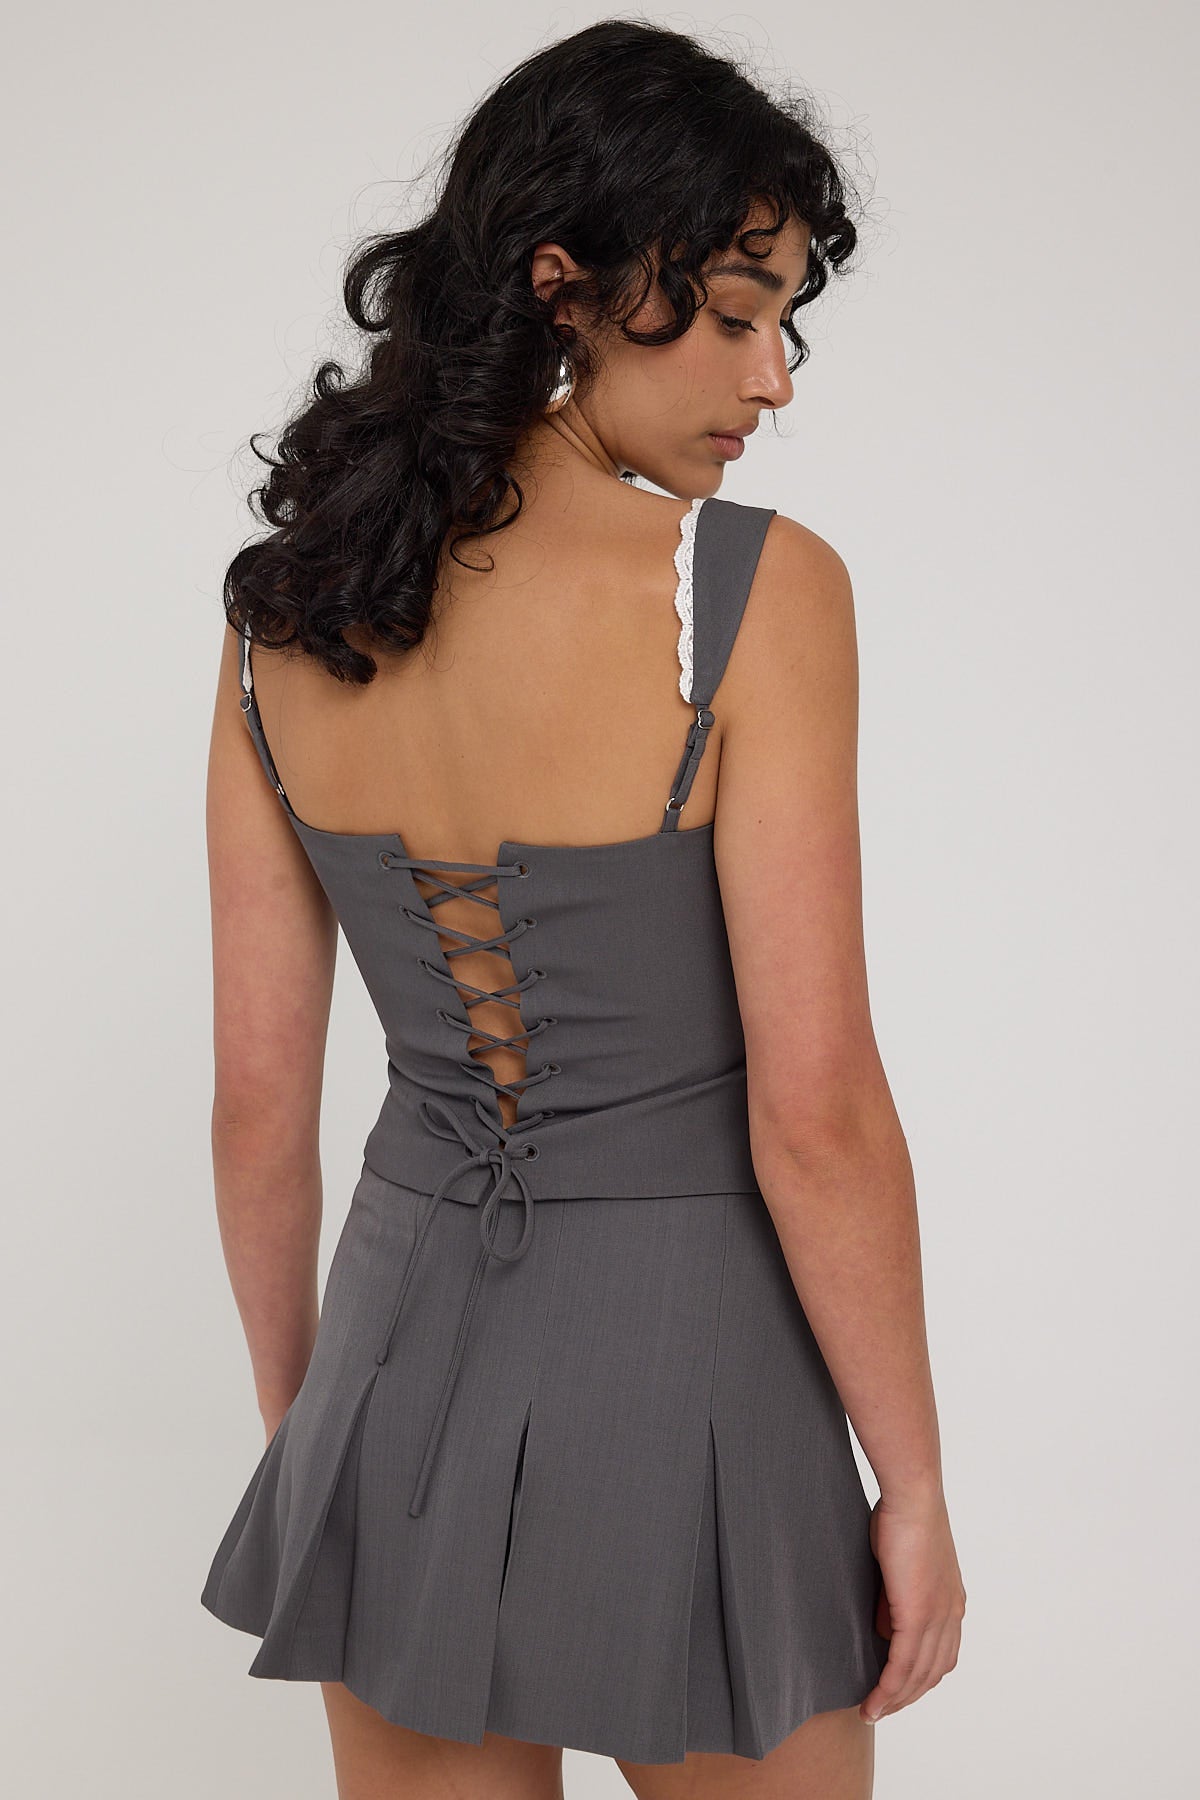 Luck & Trouble Model Me Lace Back Corset Top Grey